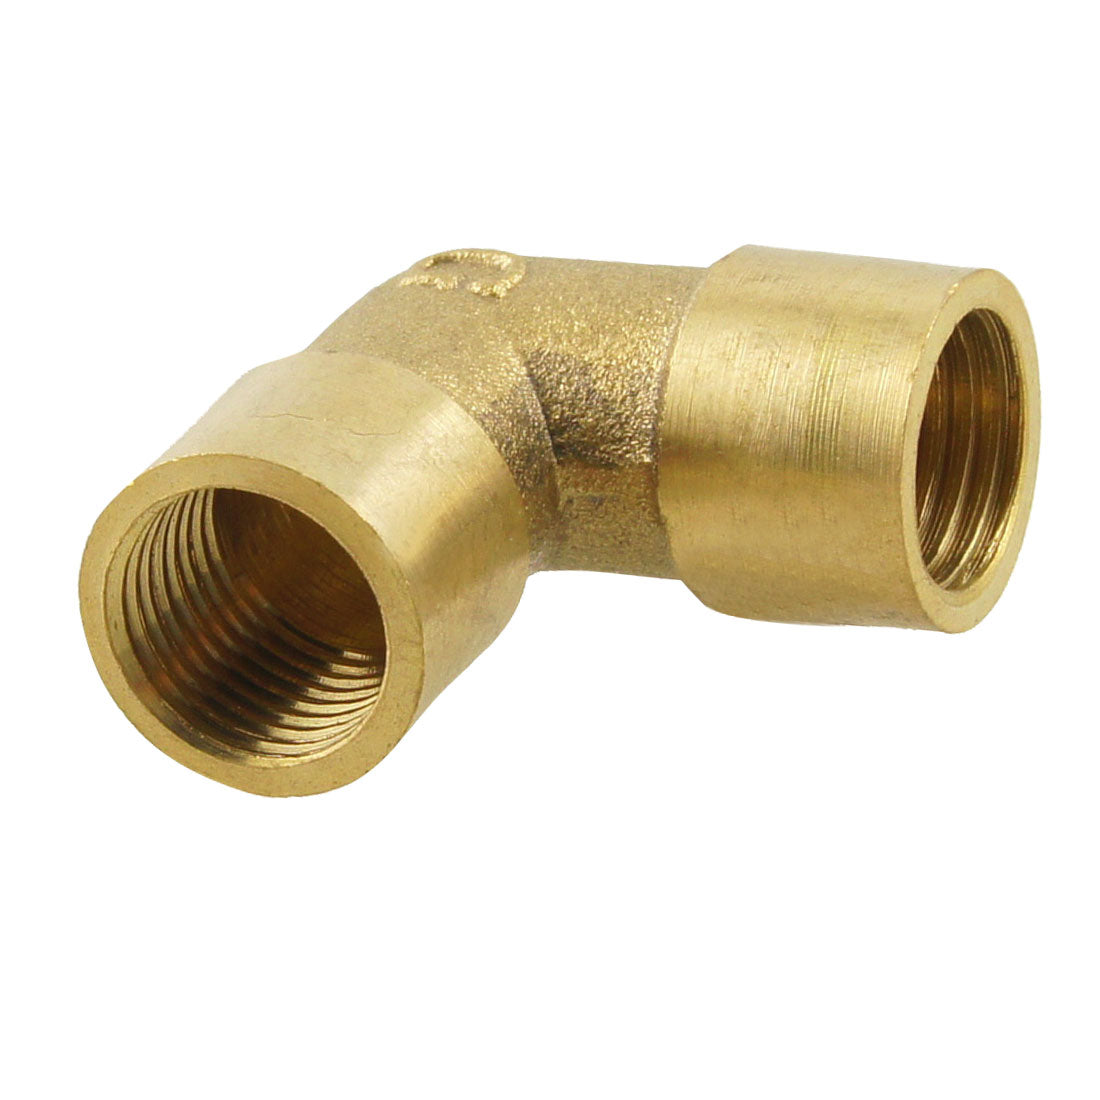 uxcell Uxcell G 1/4" Female Threaded 90 Degree Elbow Fitting Union Adapter Gold Tone